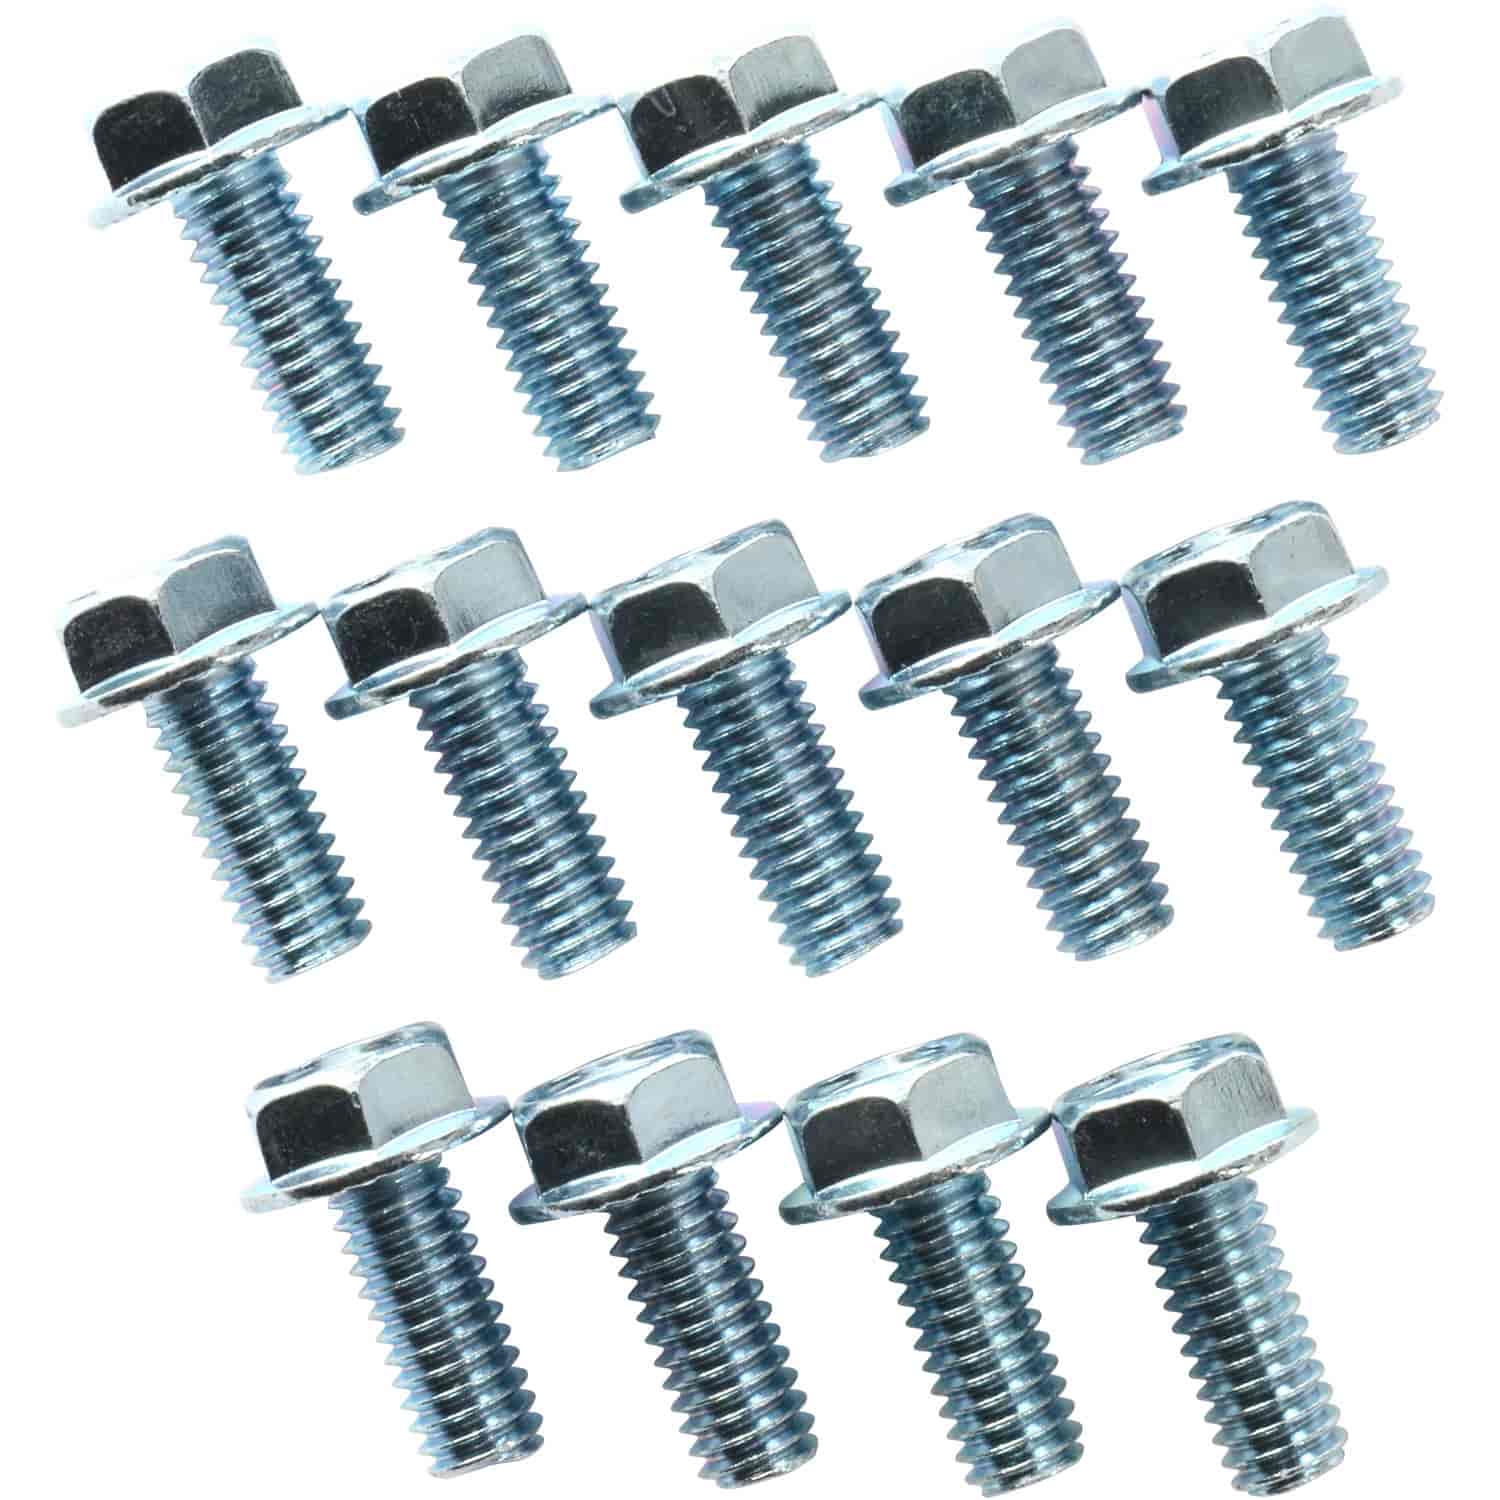 Zinc-Plated Differential Cover Bolts 5/16